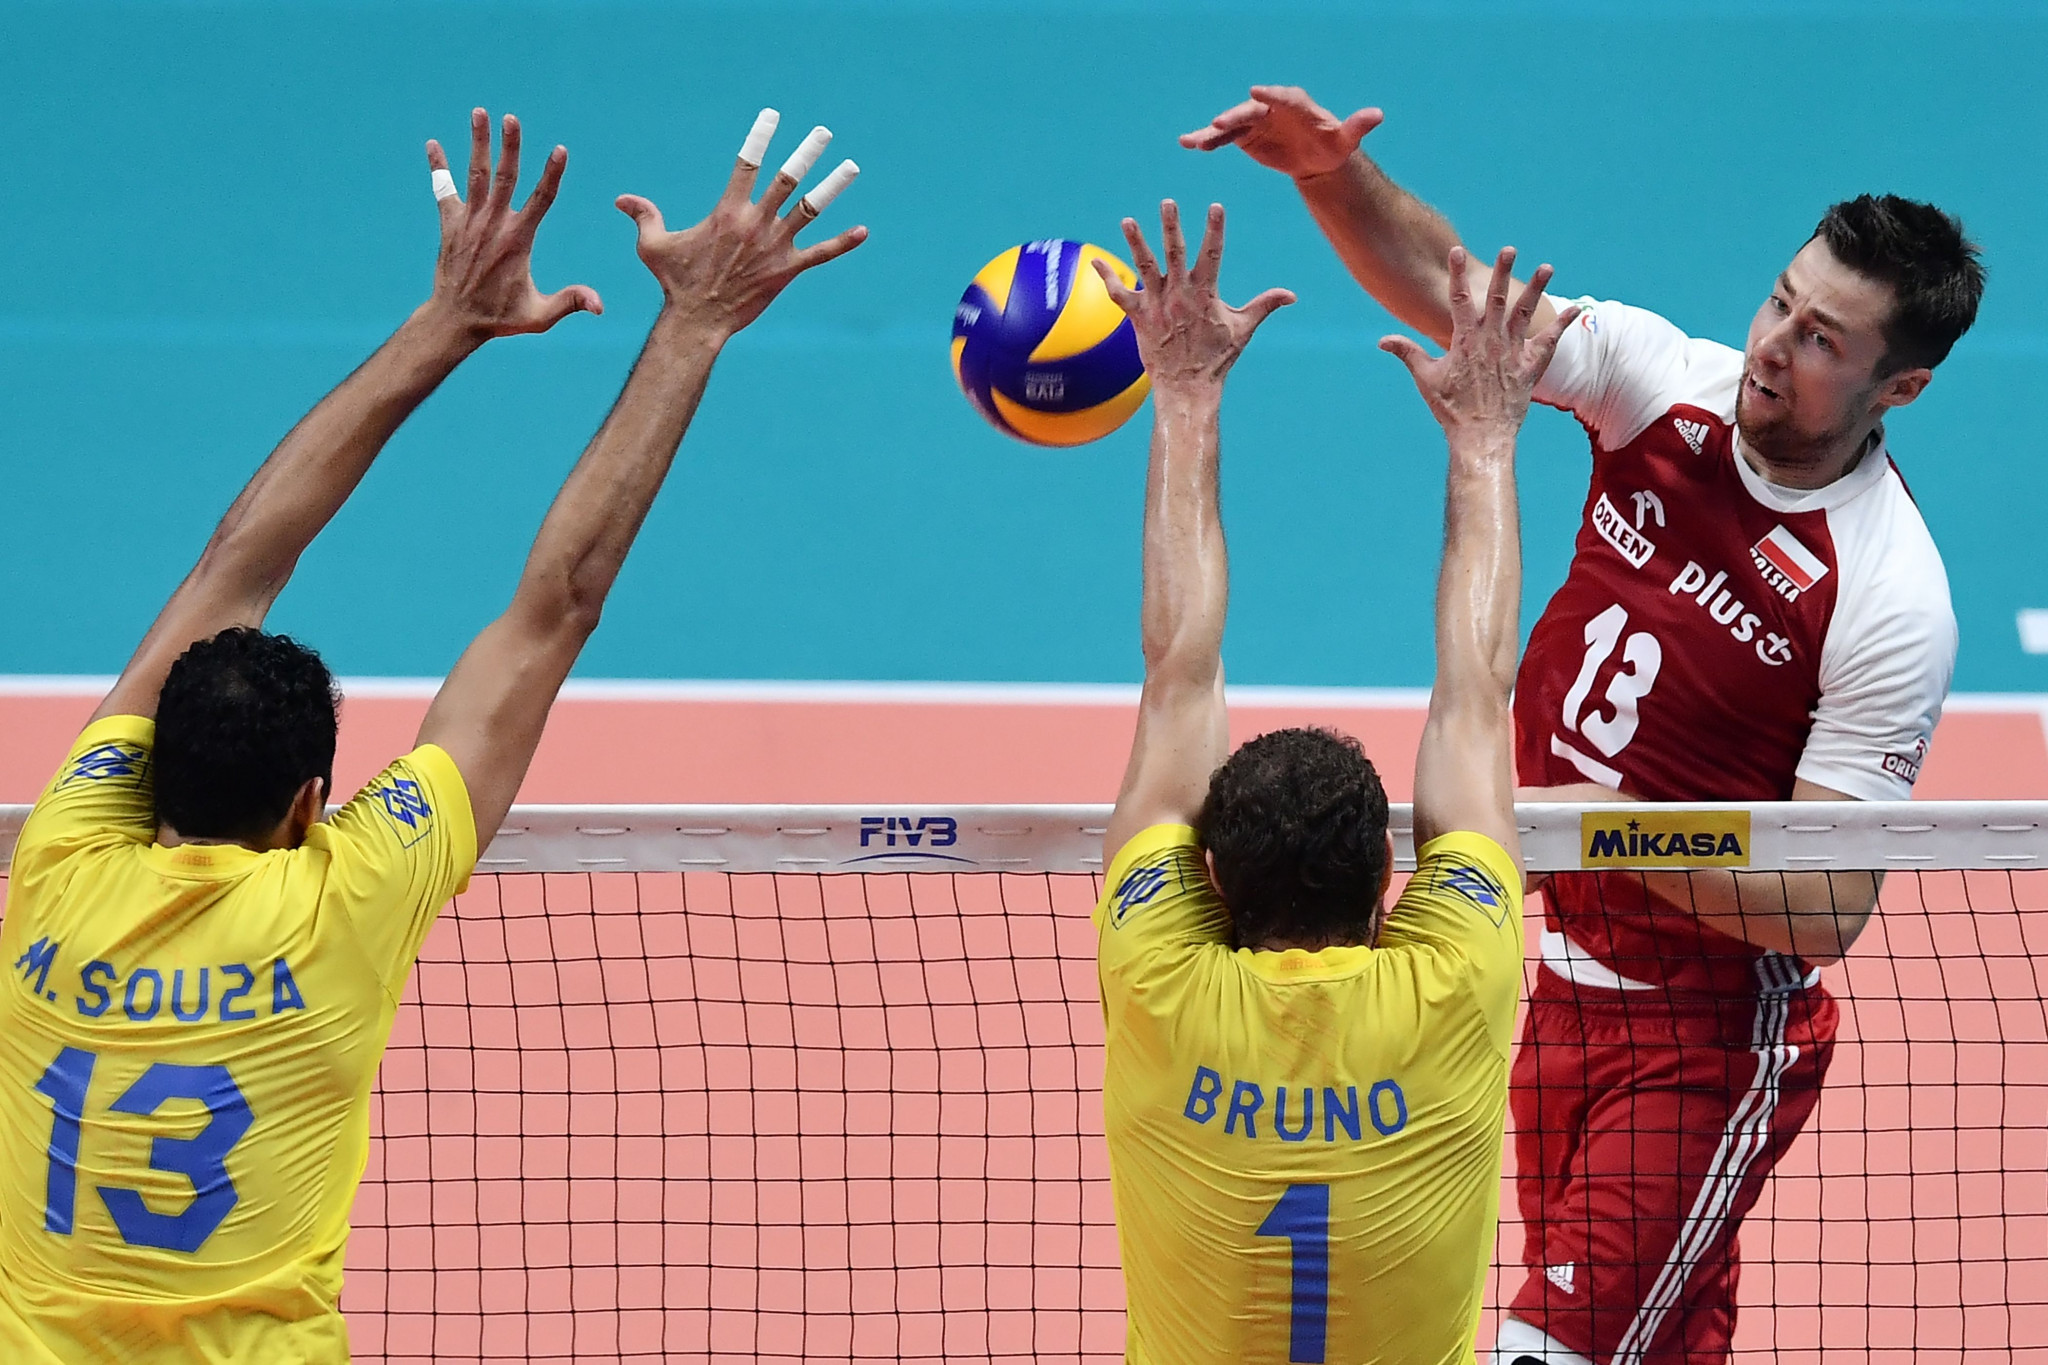 The FIVB has "strongly recommended" that the Polish Volleyball Federation require Michal Kubiak to issue a written apology after the player was given a six-match suspension for making offensive remarks about the Iranian team and people ©Getty Images